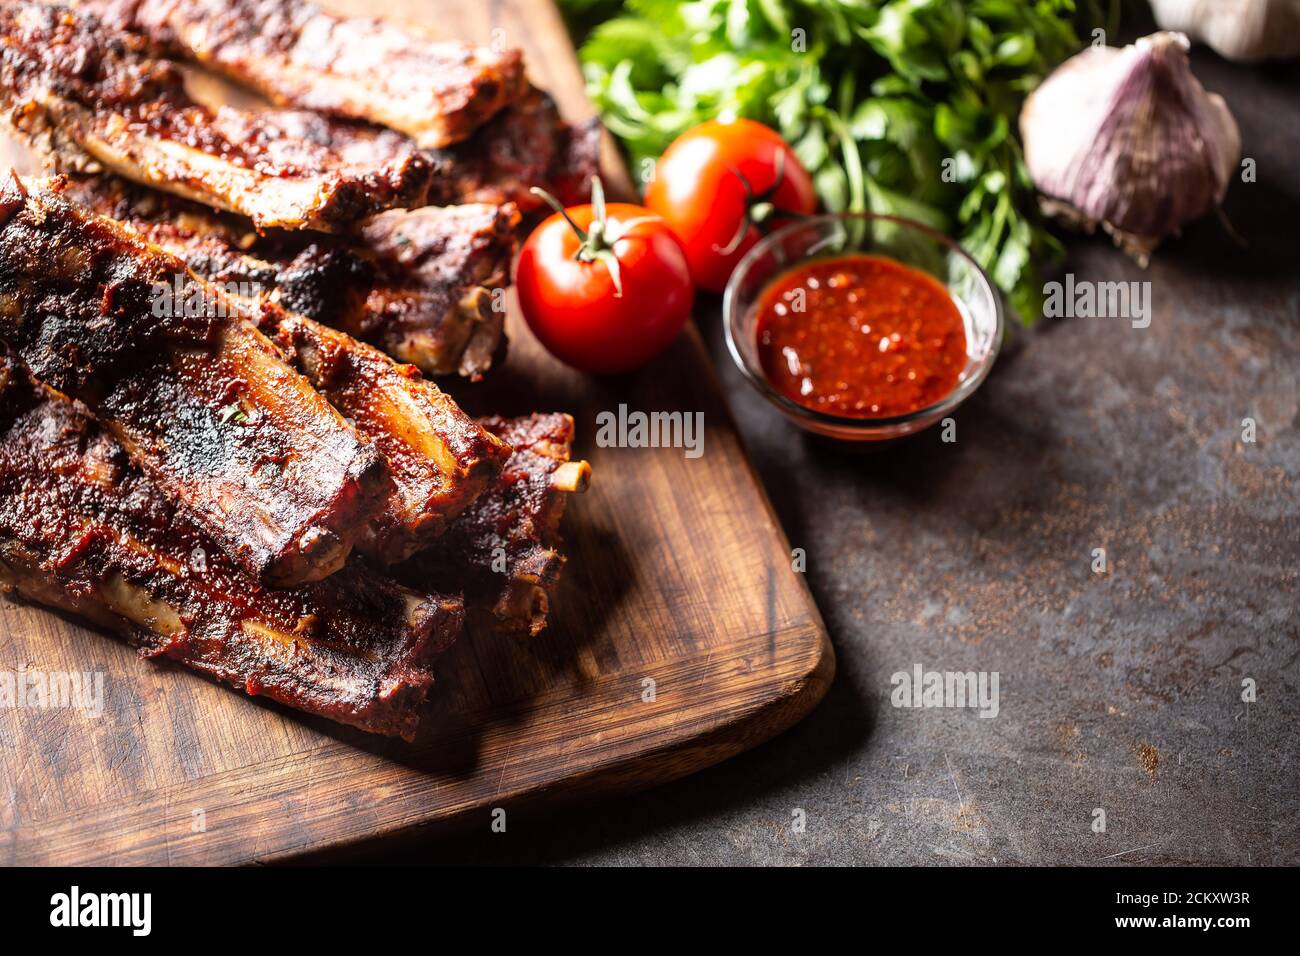 Baked glazed bbq ribs with a tomato sauce on the side Stock Photo